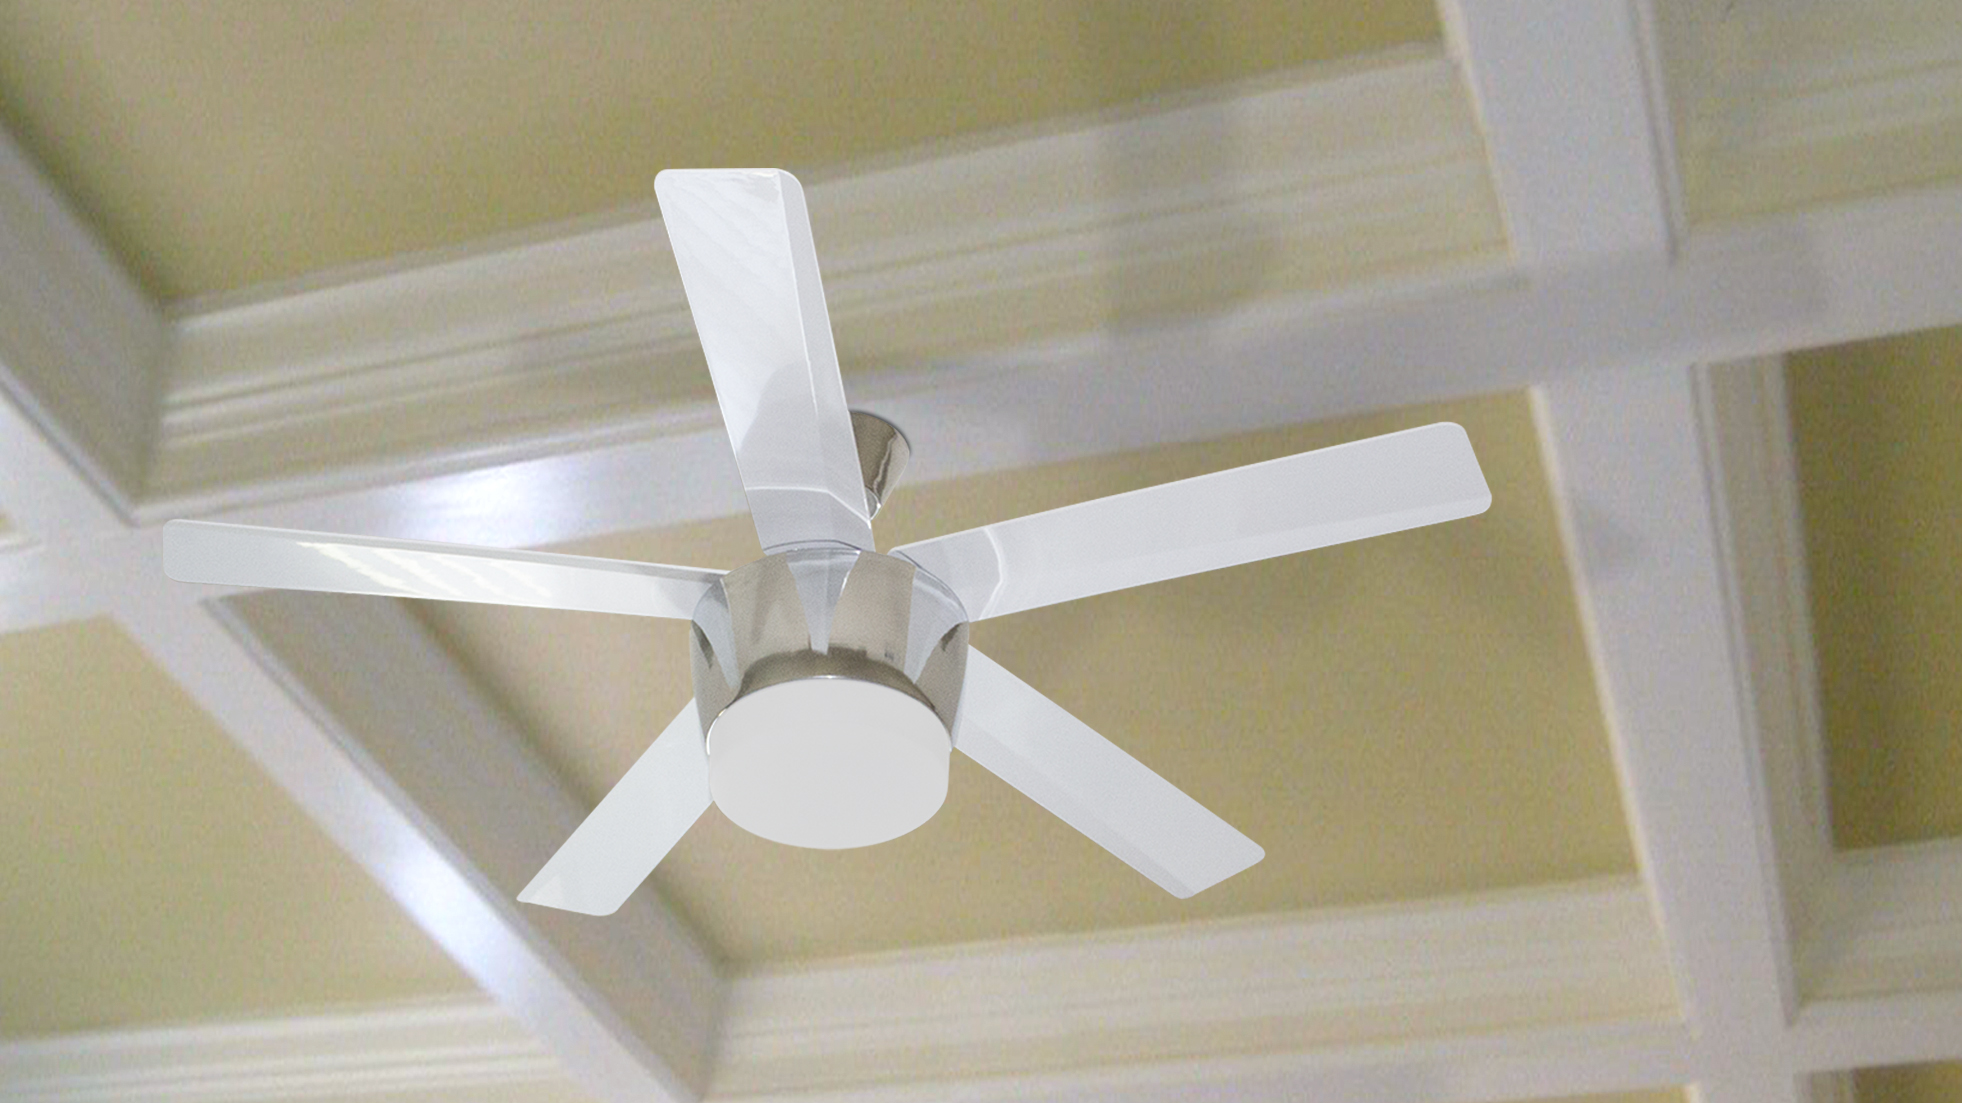 Home Decorators Collection Merwry 52" LED Indoor Ceiling Fan w